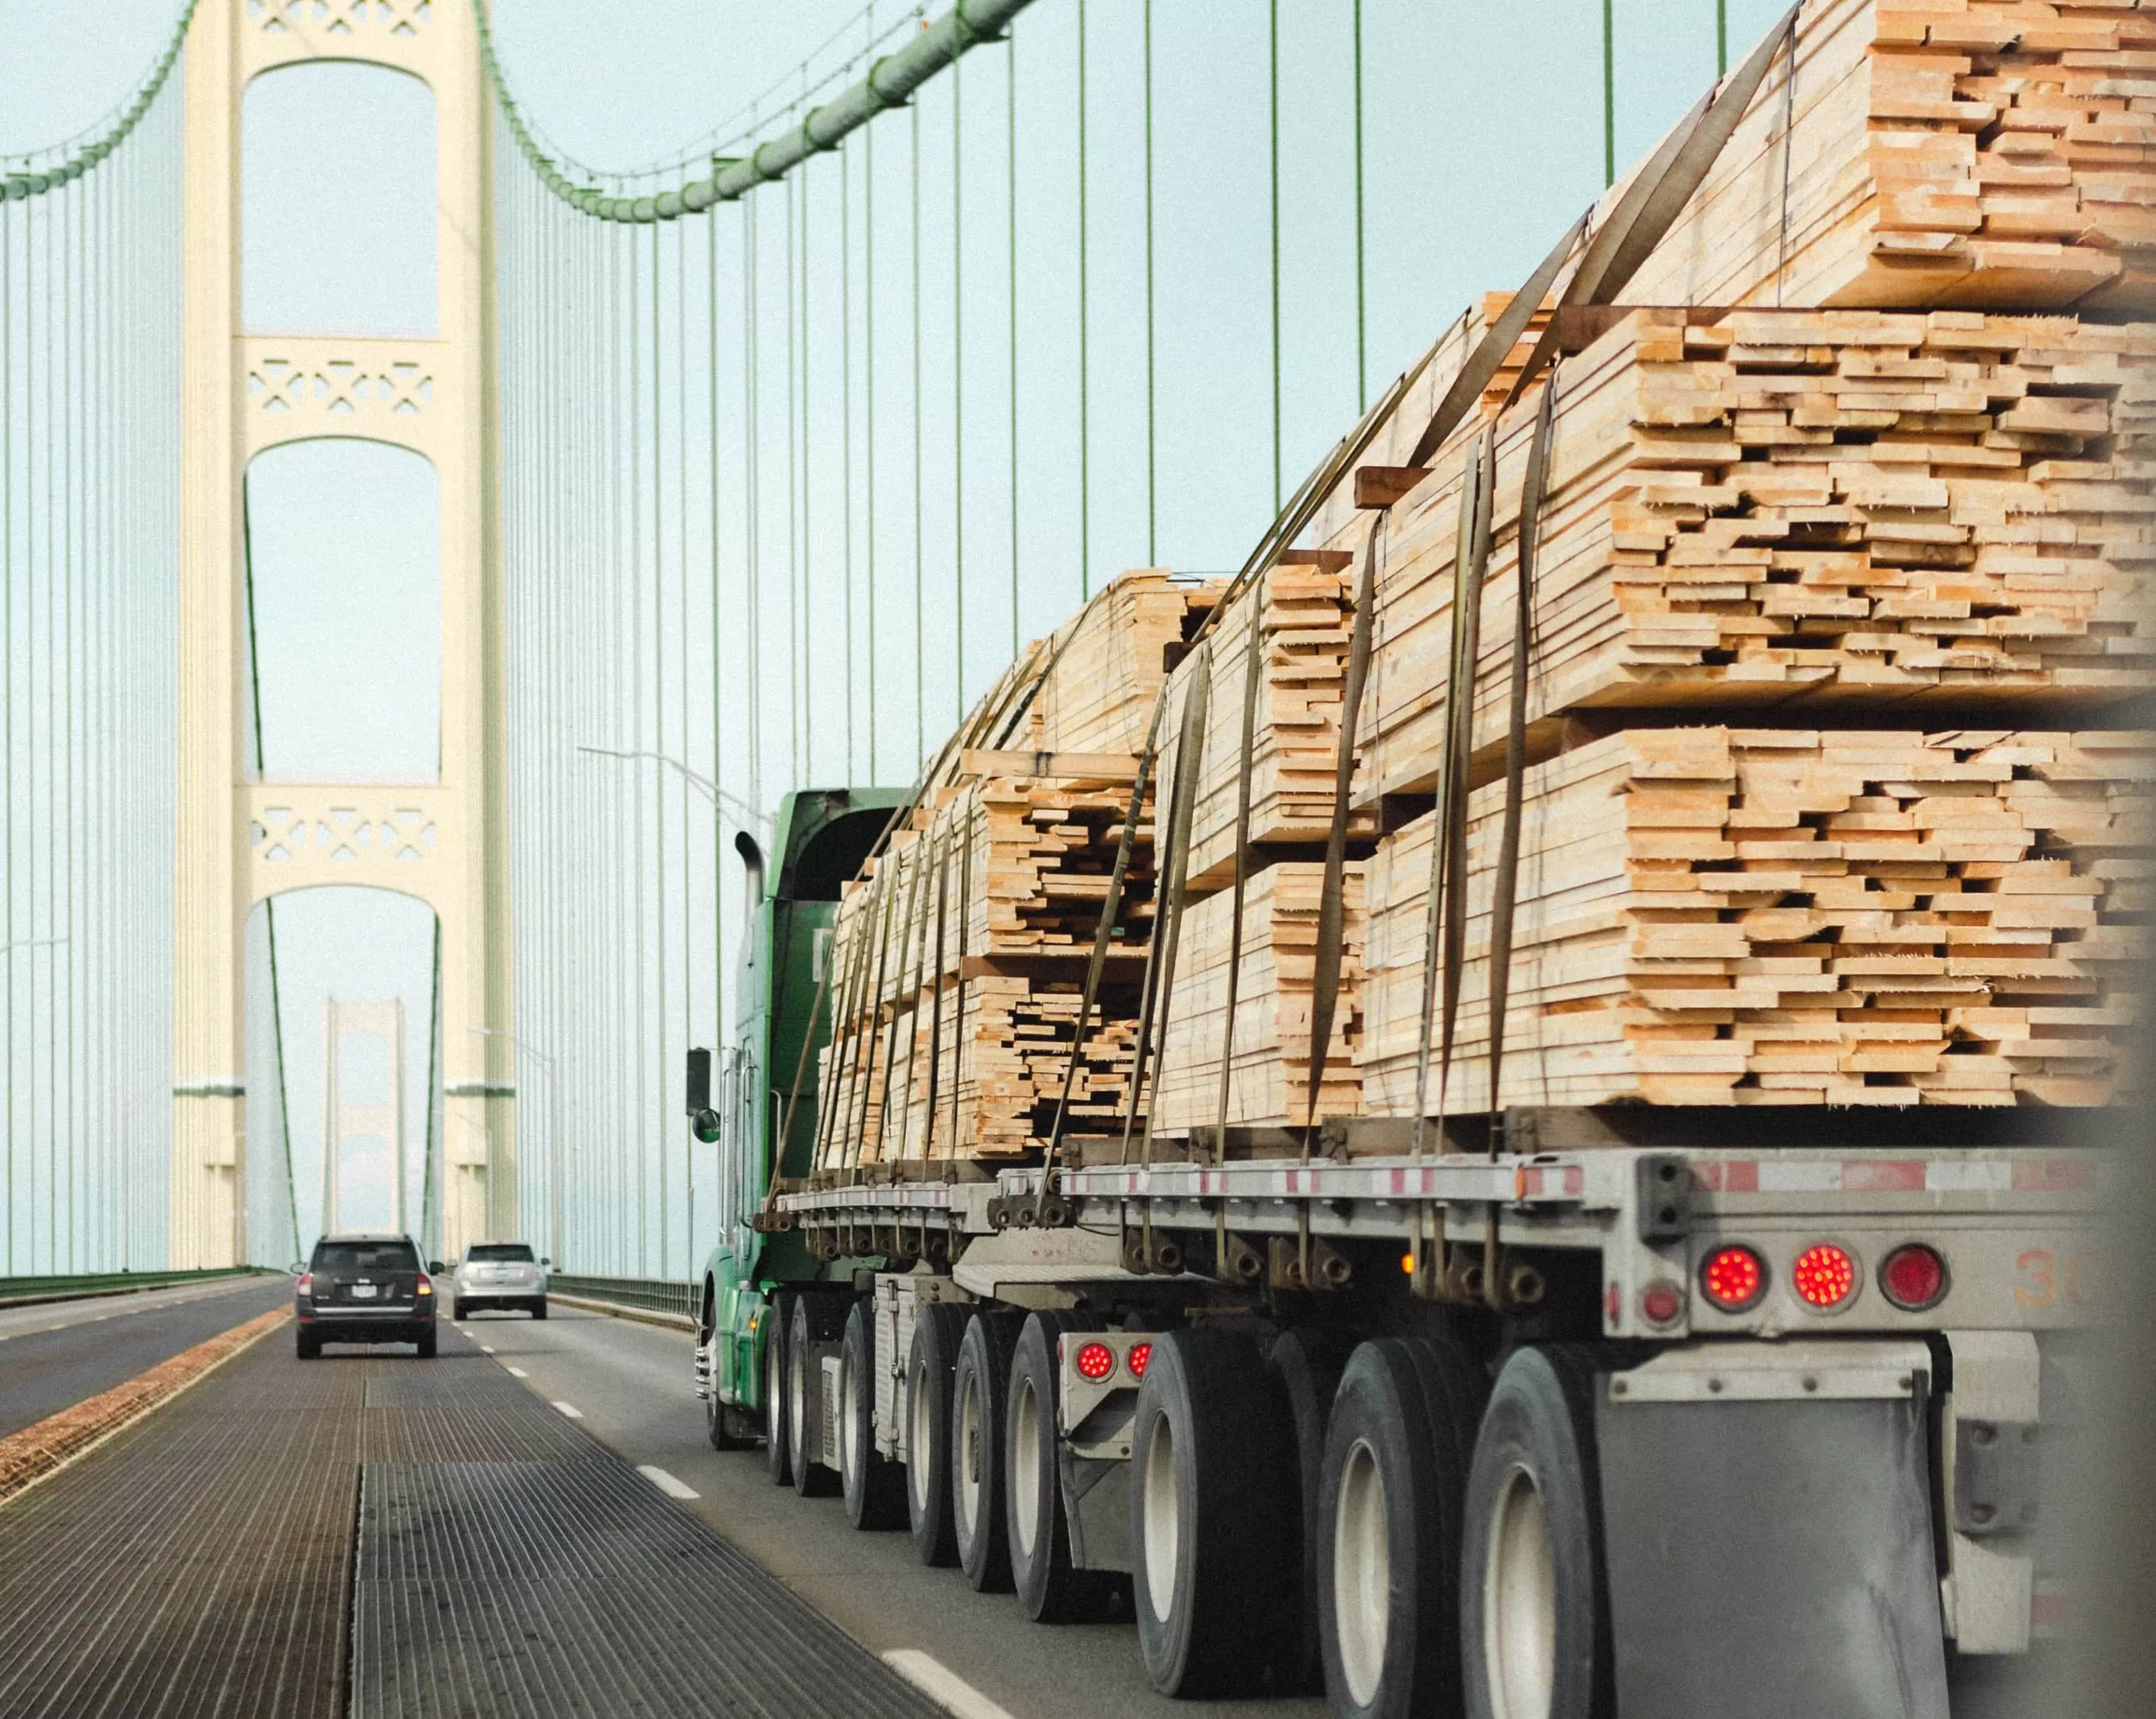 A green truck on the bridge loaded with wood